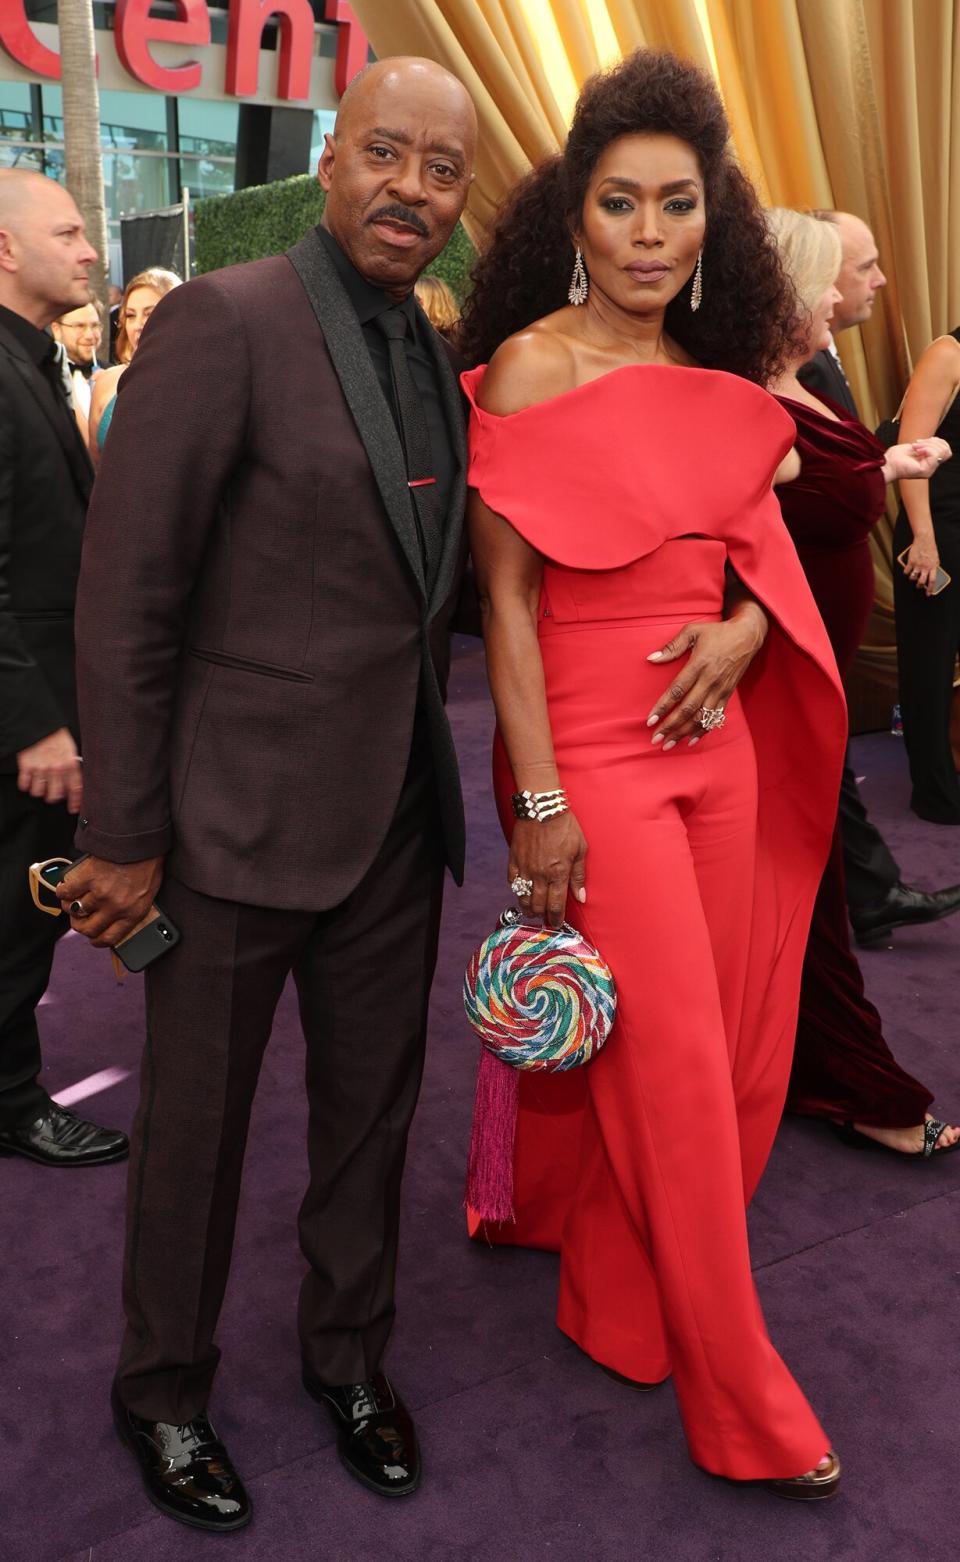 Courtney B. Vance and Angela Bassett attend FOXS LIVE EMMY RED CARPET ARRIVALS during the 71ST PRIMETIME EMMY AWARDS airing live from the Microsoft Theater at L.A. LIVE in Los Angeles on Sunday, September 22 on FOX